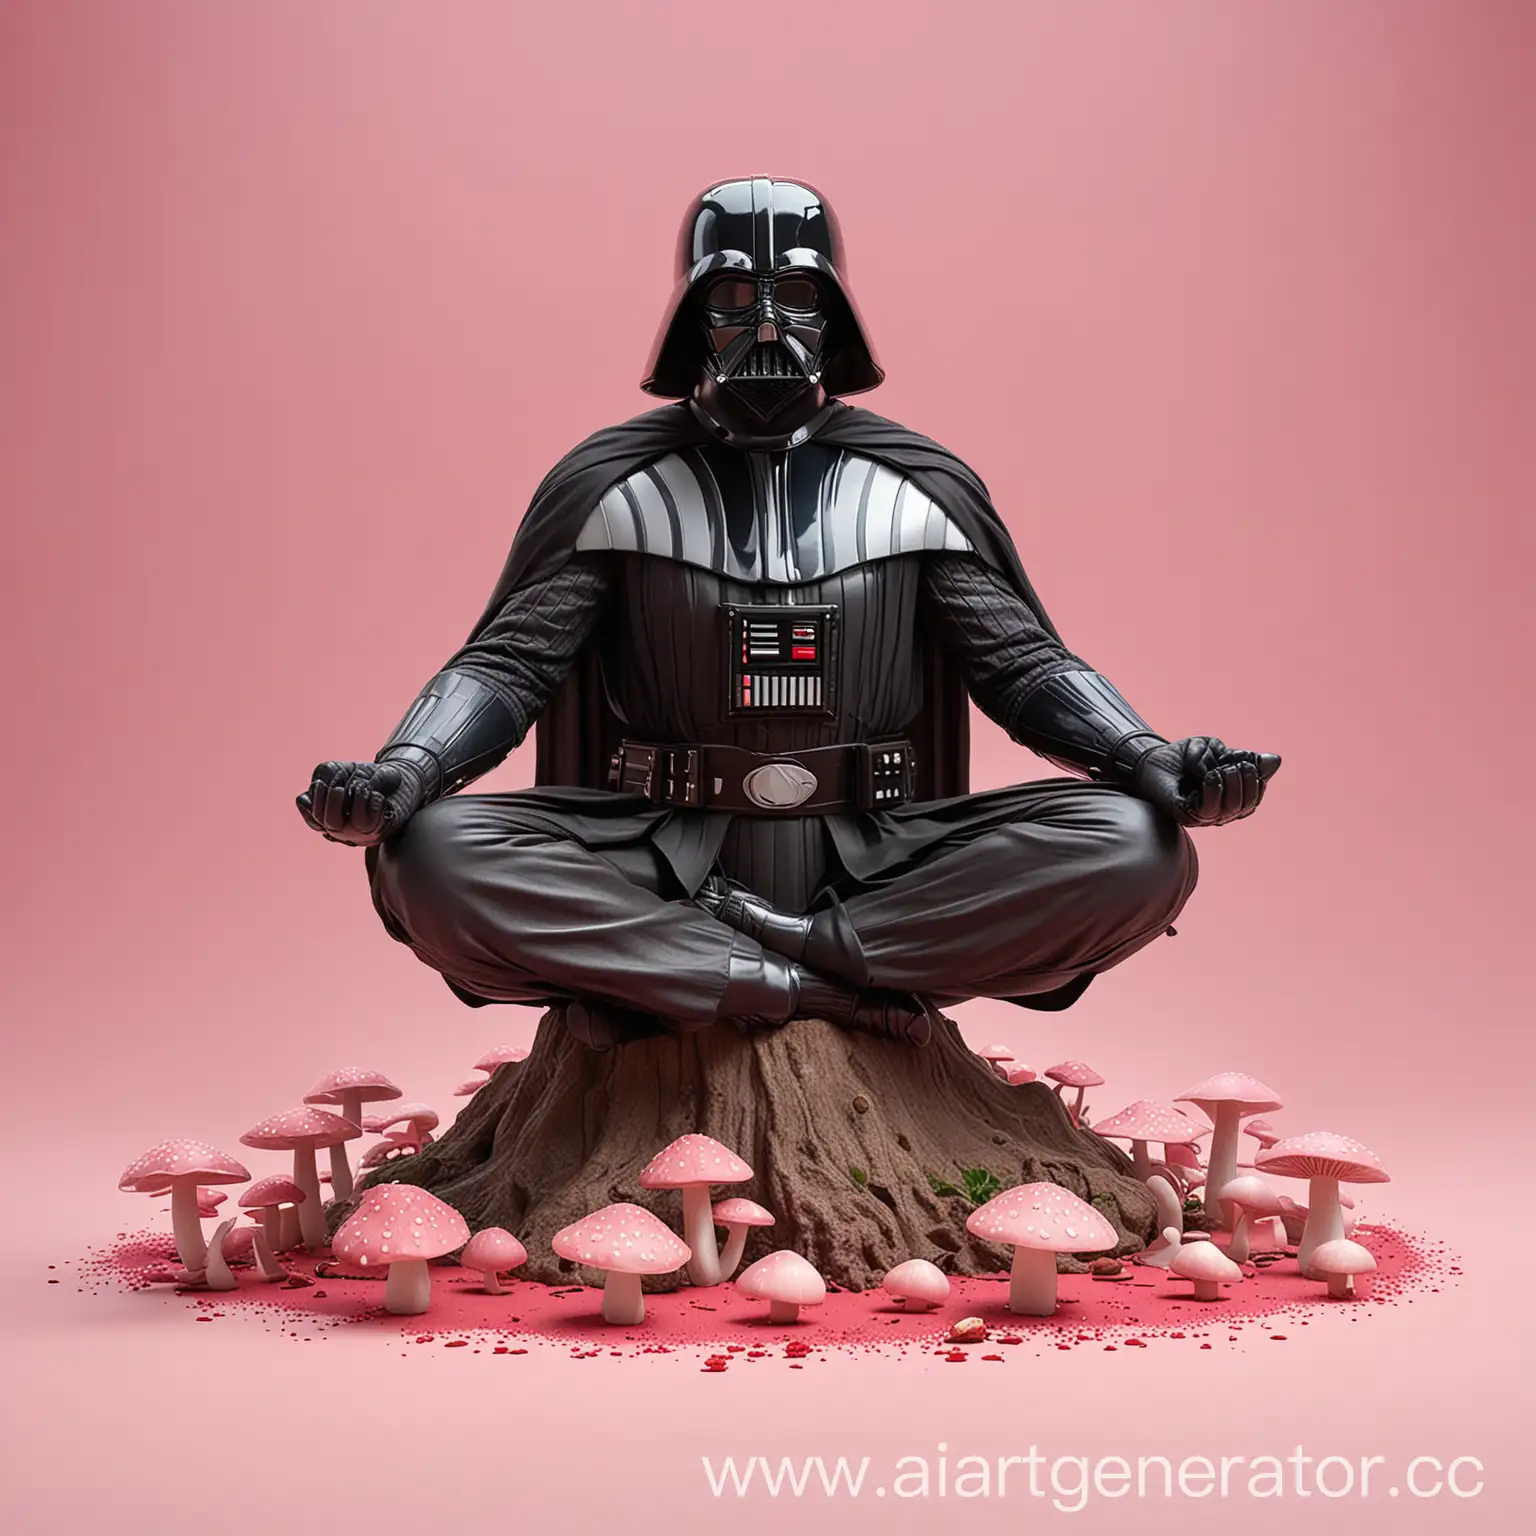 Darth Vader levitates in the lotus position, lifting off the floor, fly agaric mushrooms fly around him, realistic, detailed details, correct anatomy, pink background, plain floor. Looking straight at the camera!